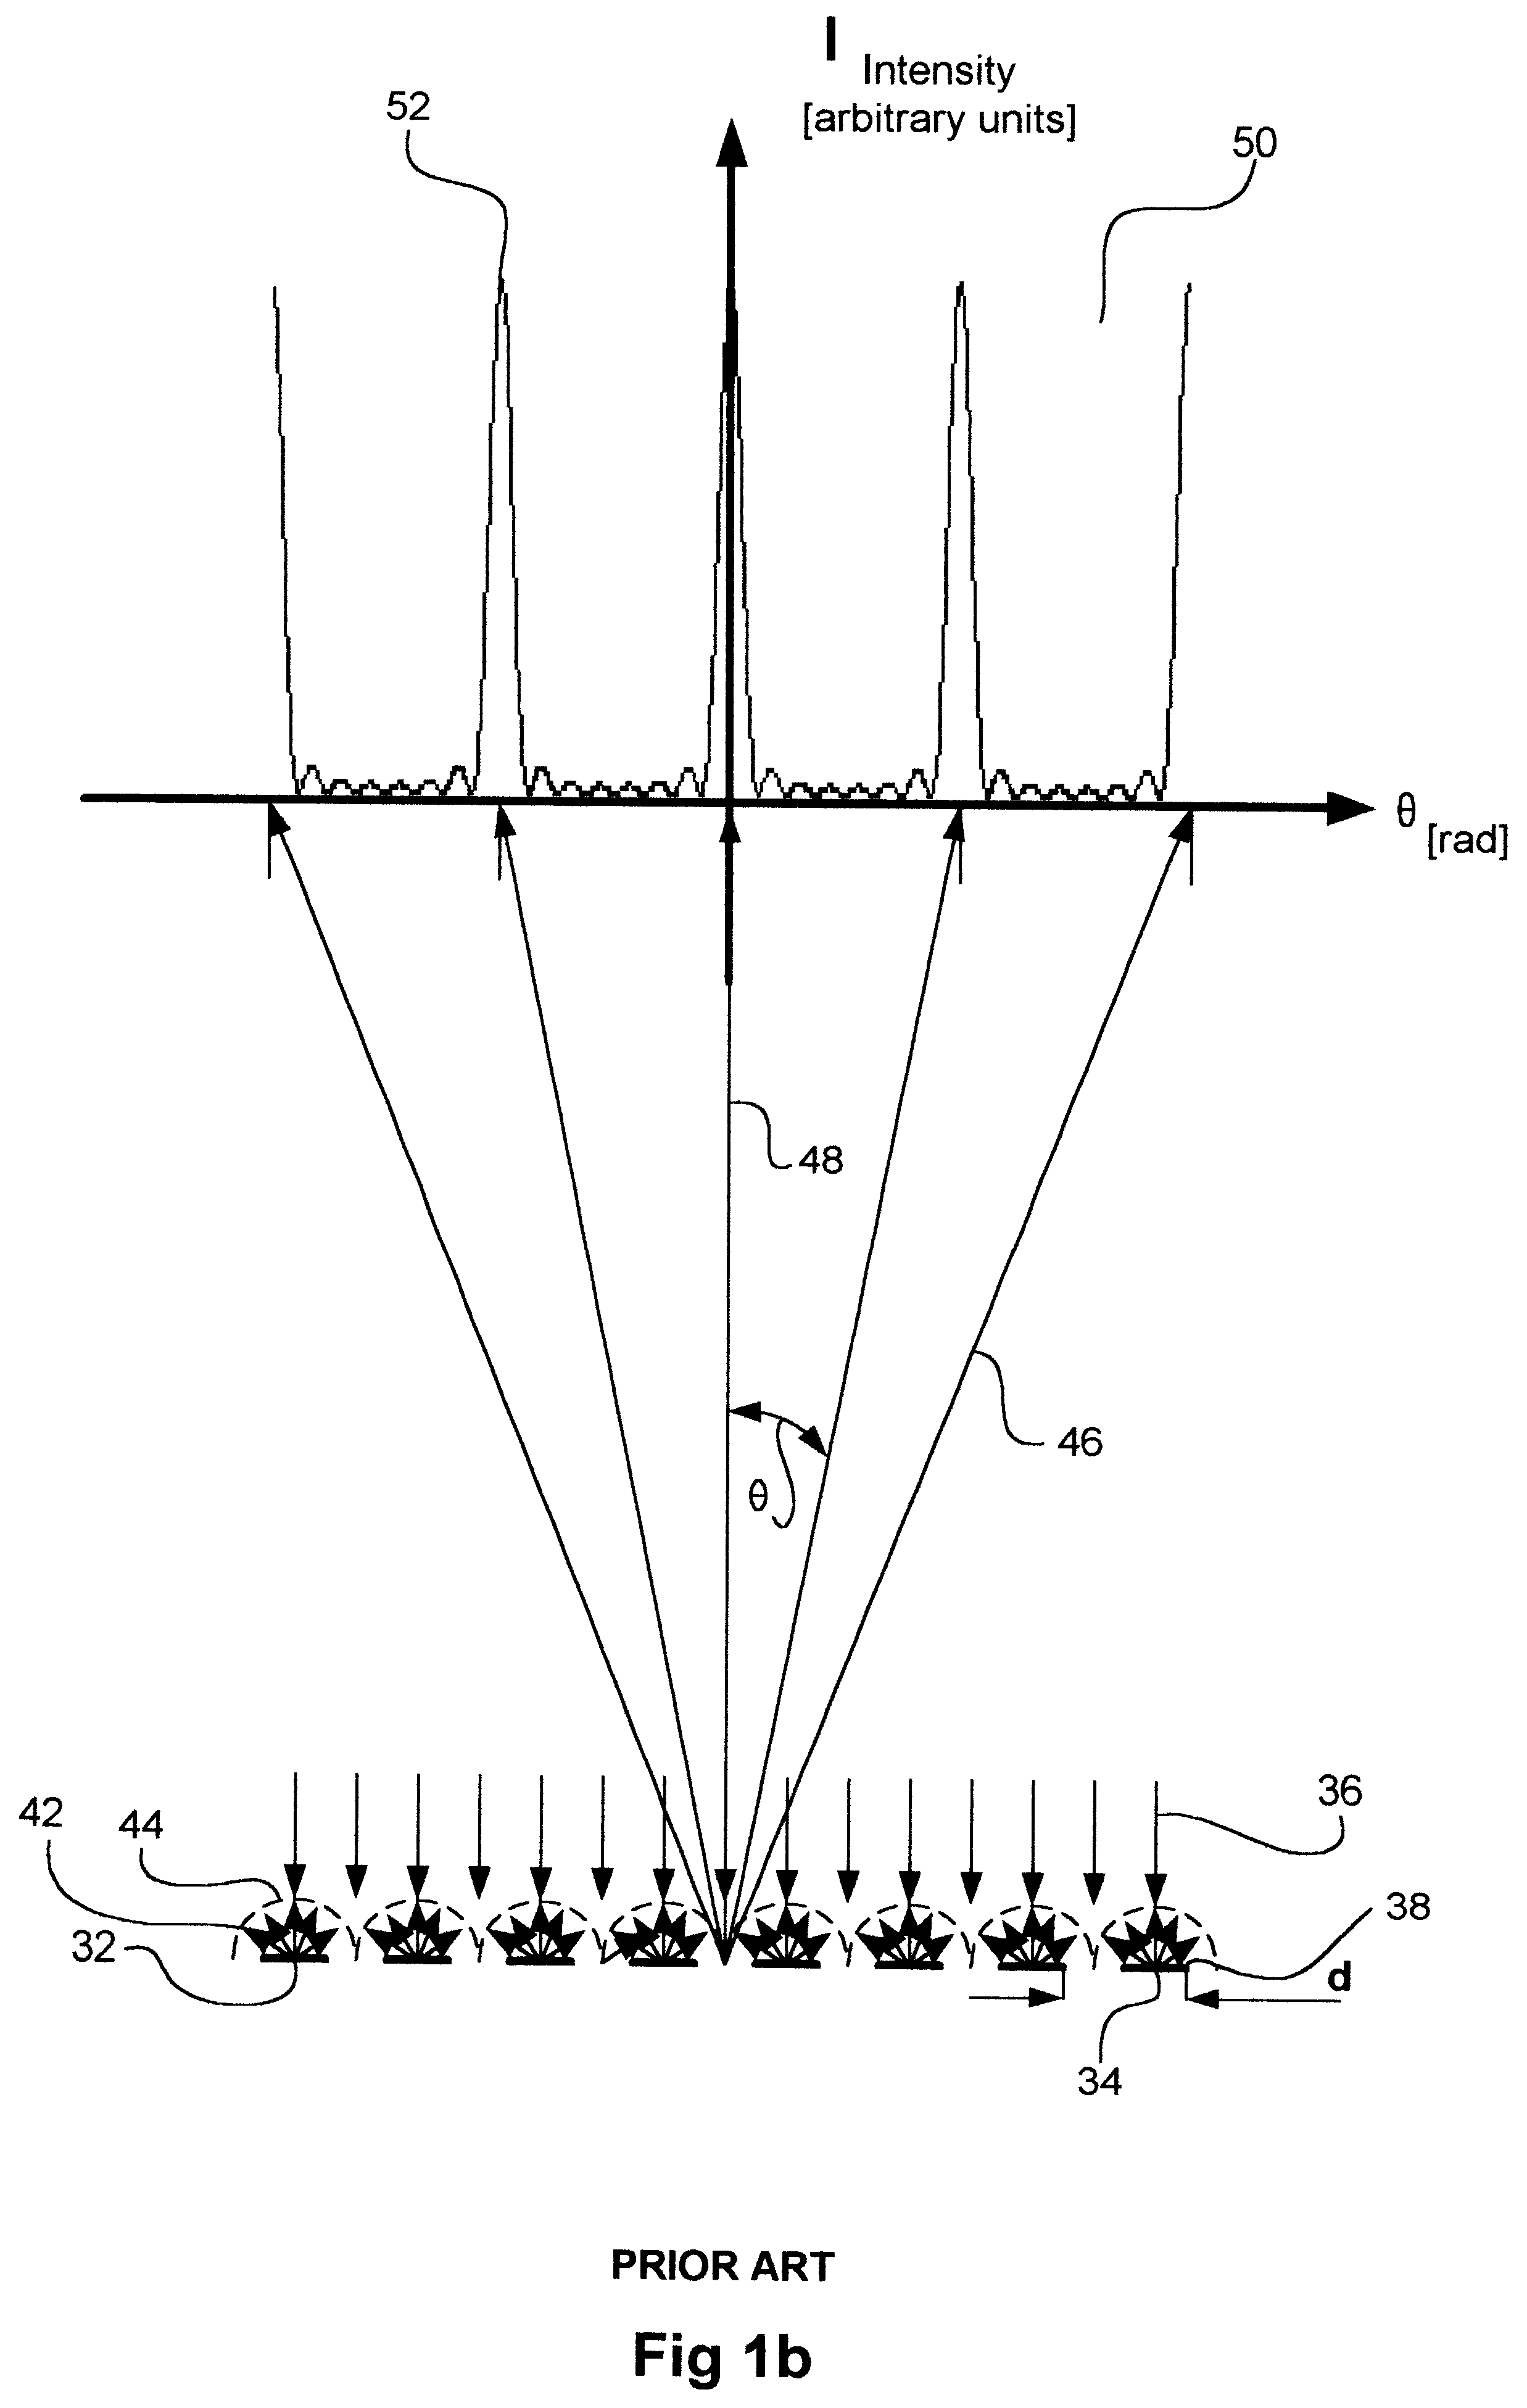 All optical narrow pulse generator and switch for dense time division multiplexing and code division multiplexing